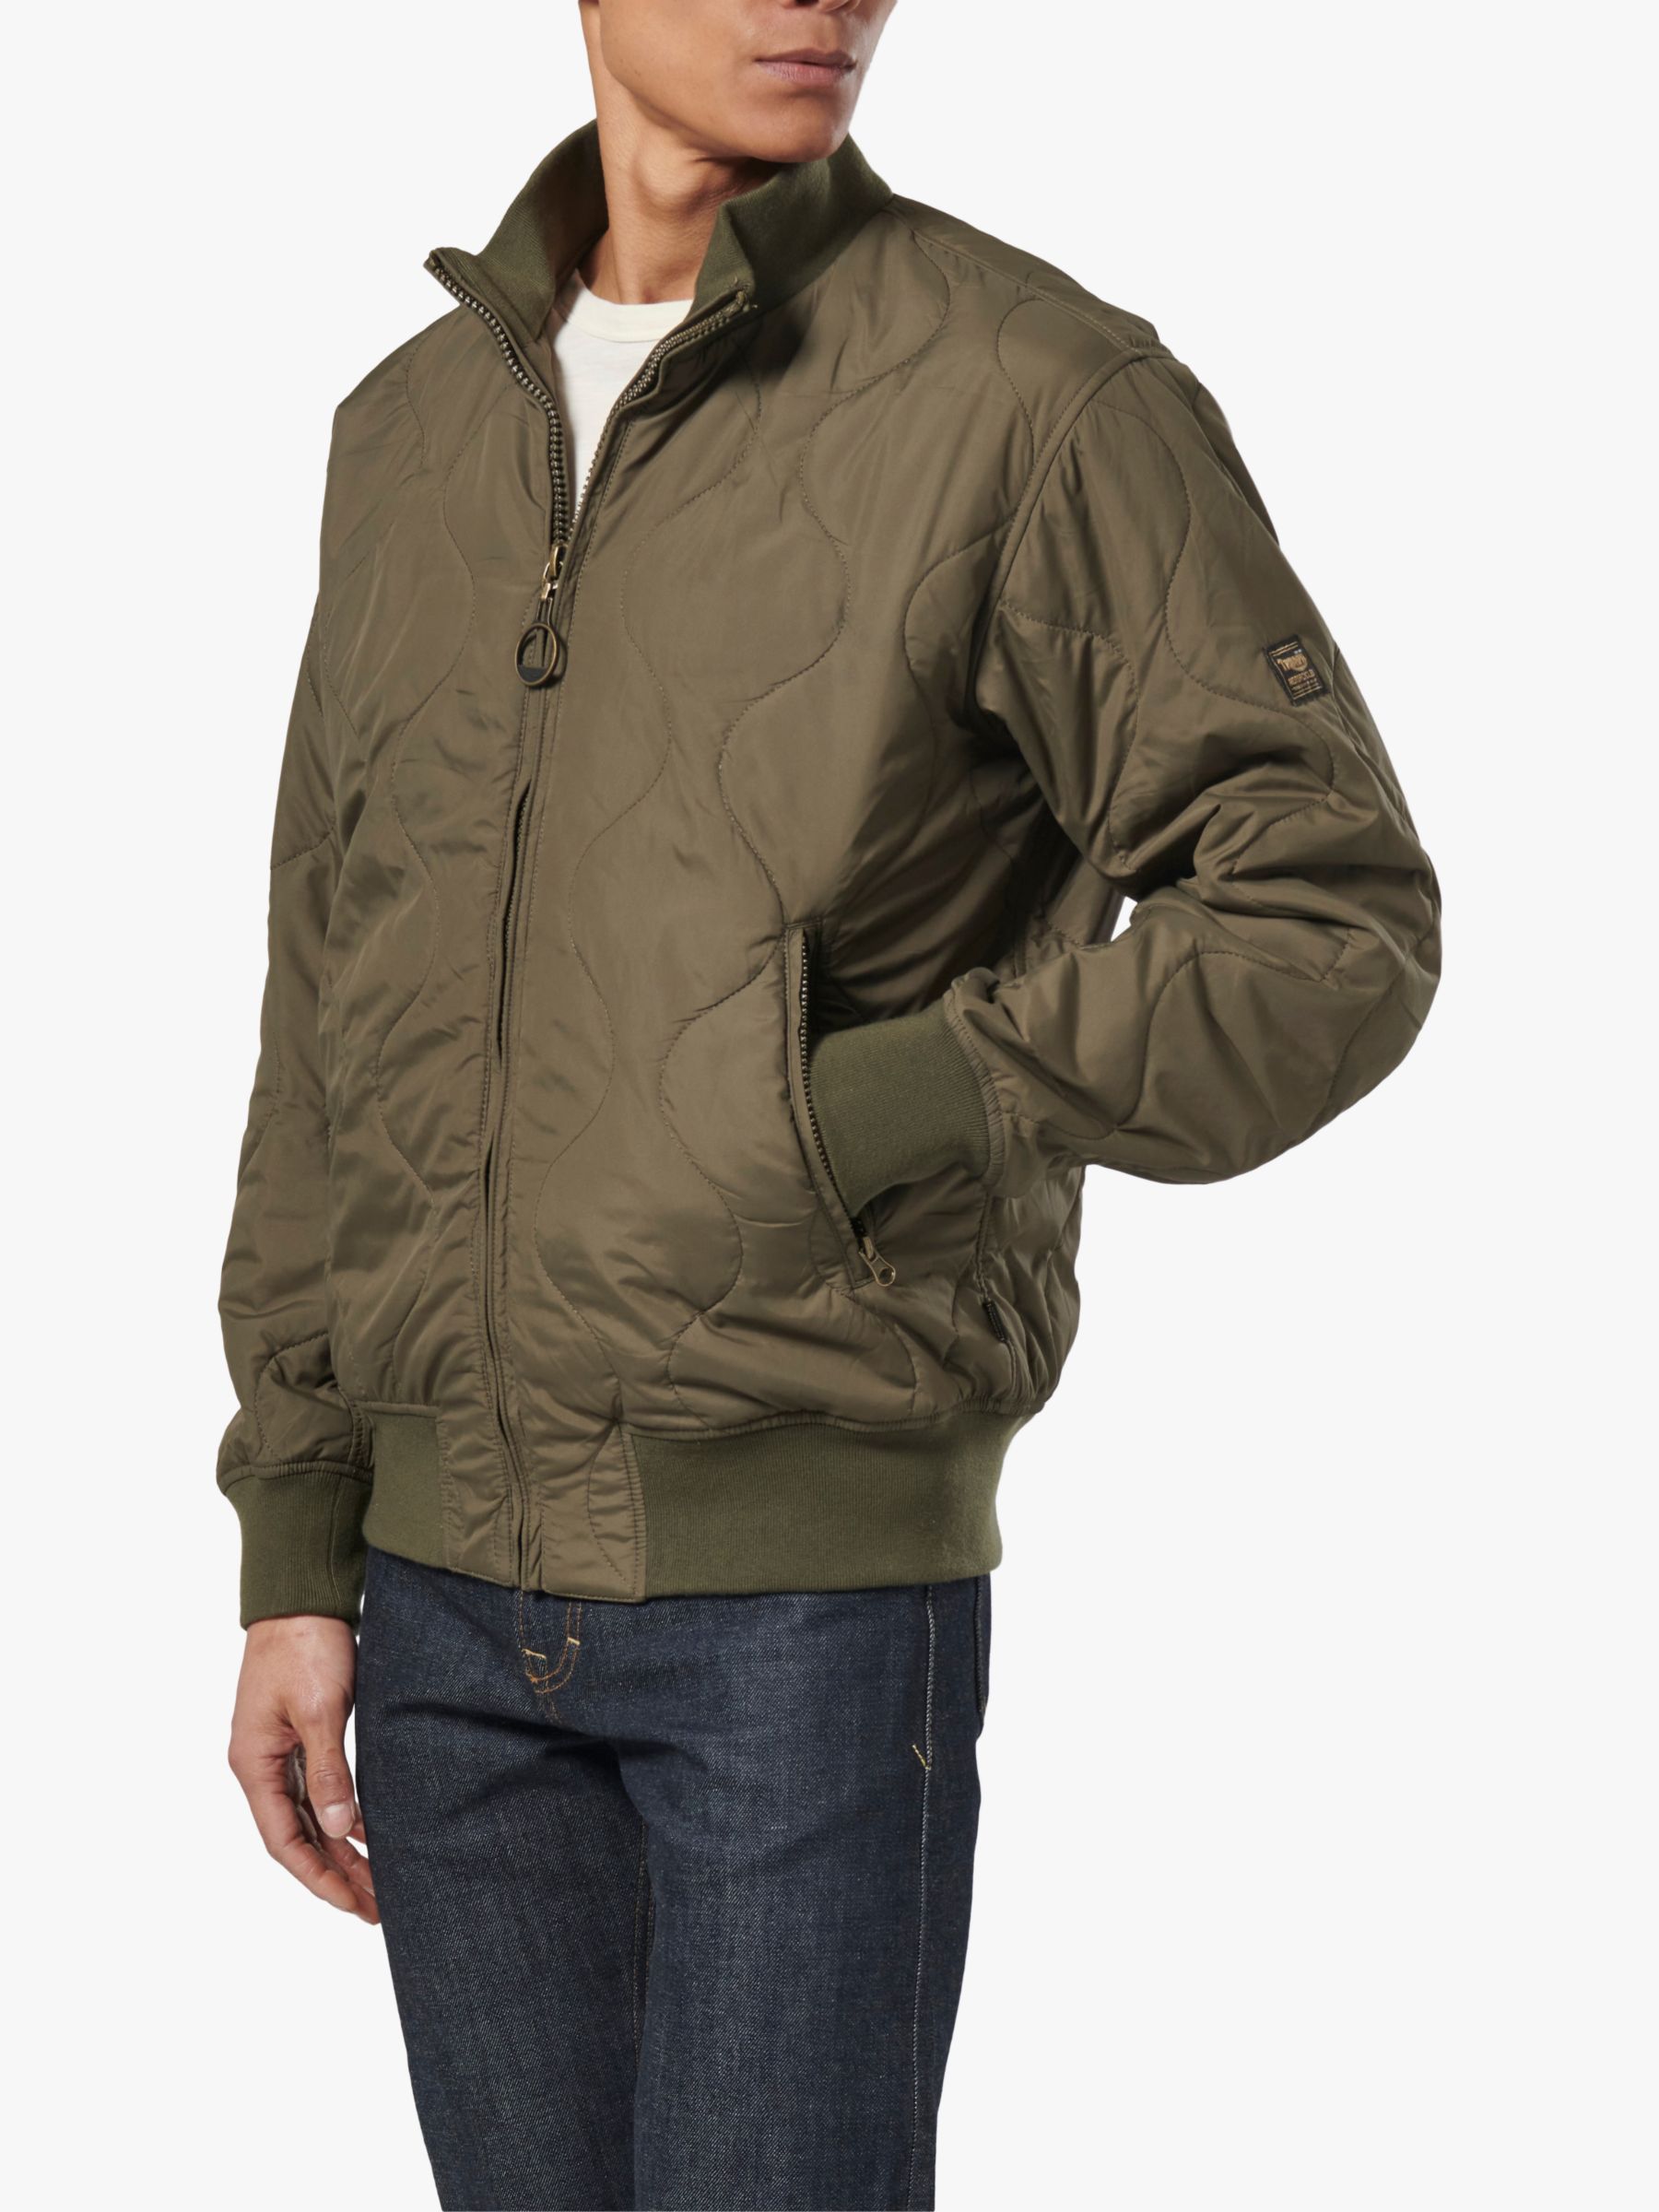 Triumph Motorcycles Crown Bomber Jacket, Olive Green, S